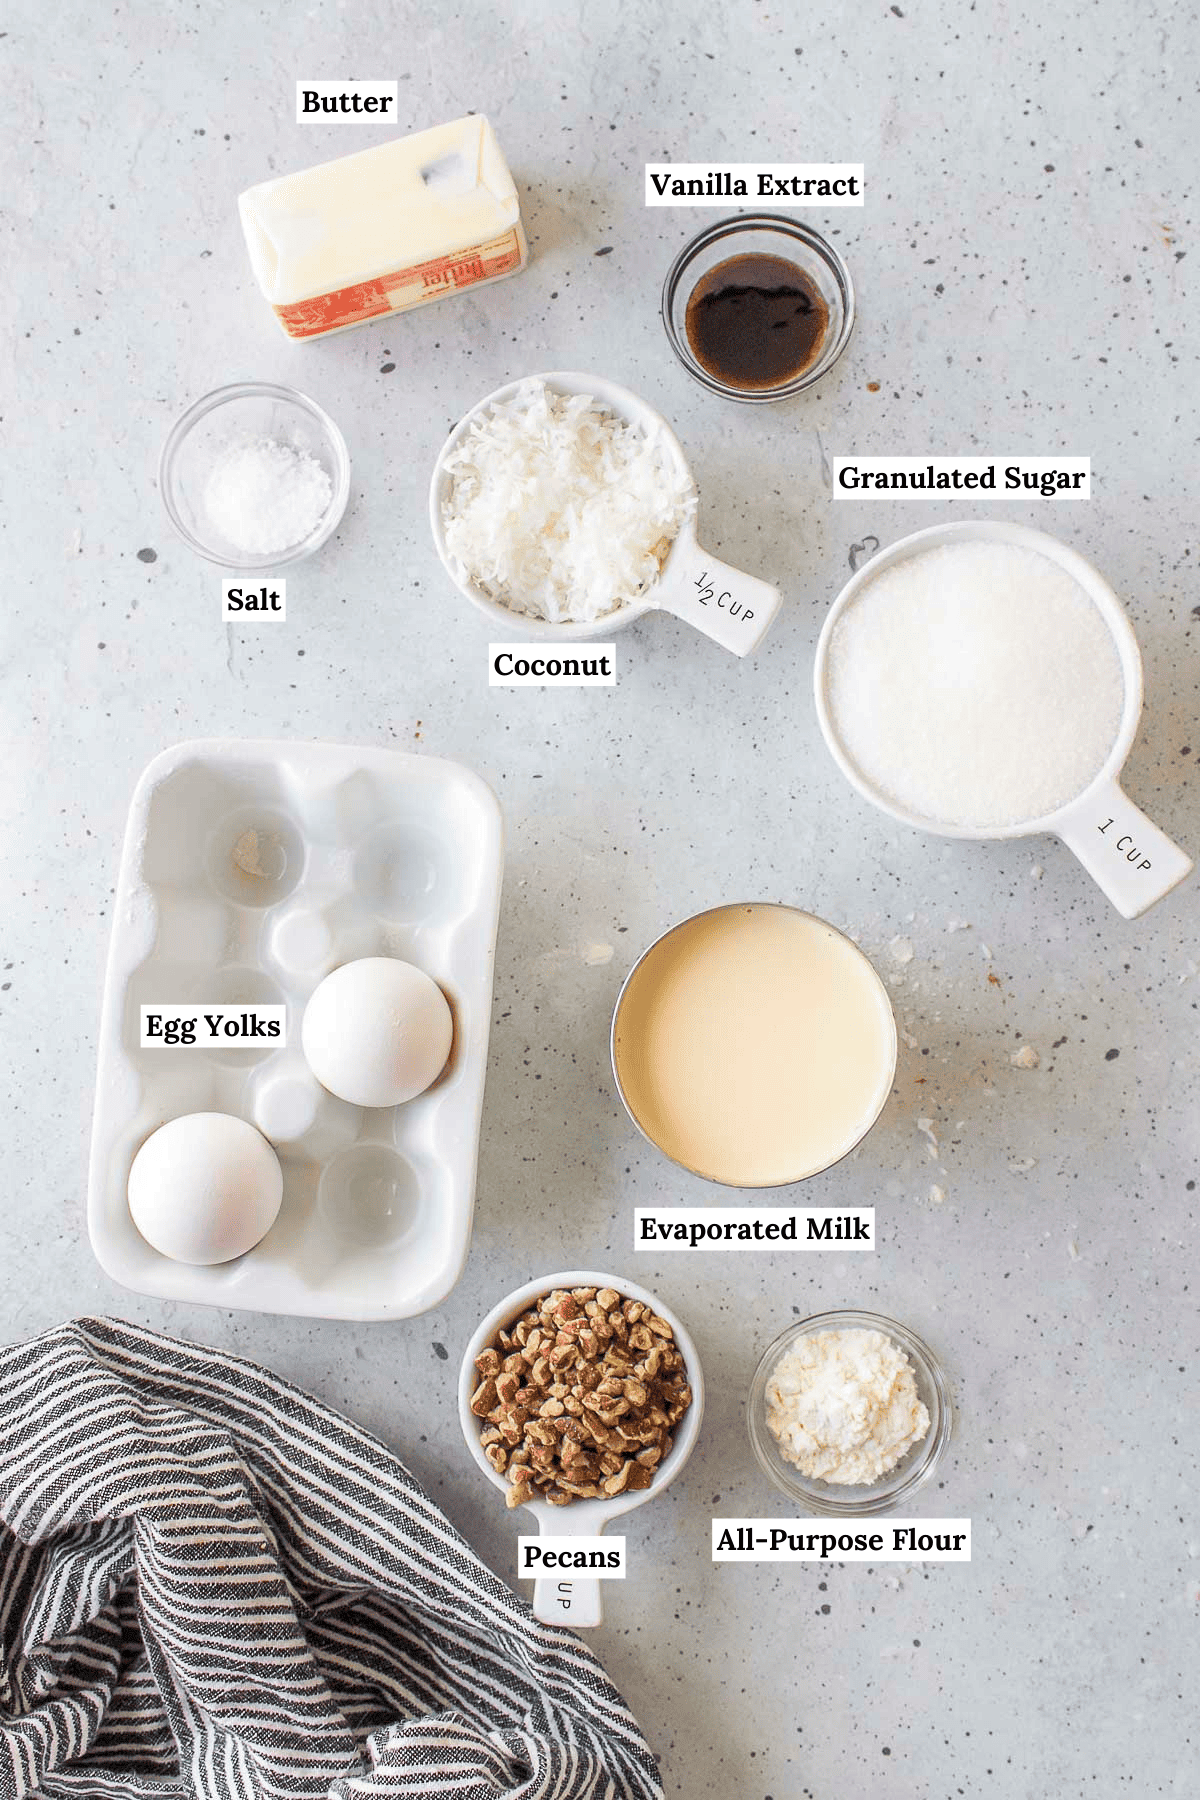 ingredients for german chocolate cake frosting including butter, vanilla extract, salt, coconut, granulated sugar, egg yolks, evaporated milk, pecans, and all-purpose flour